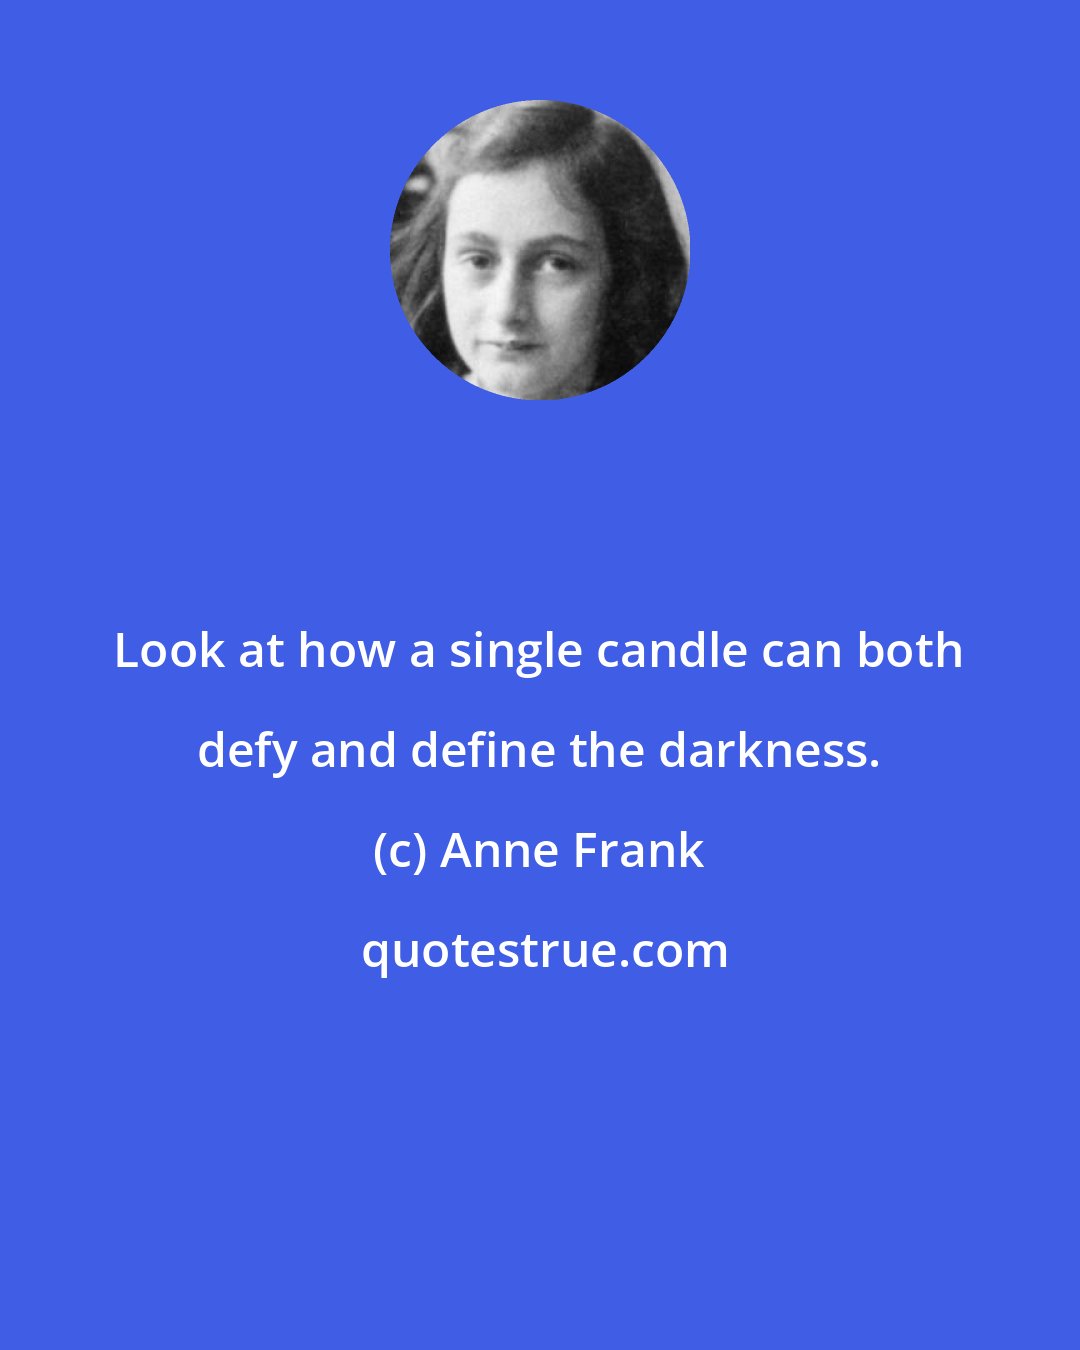 Anne Frank: Look at how a single candle can both defy and define the darkness.